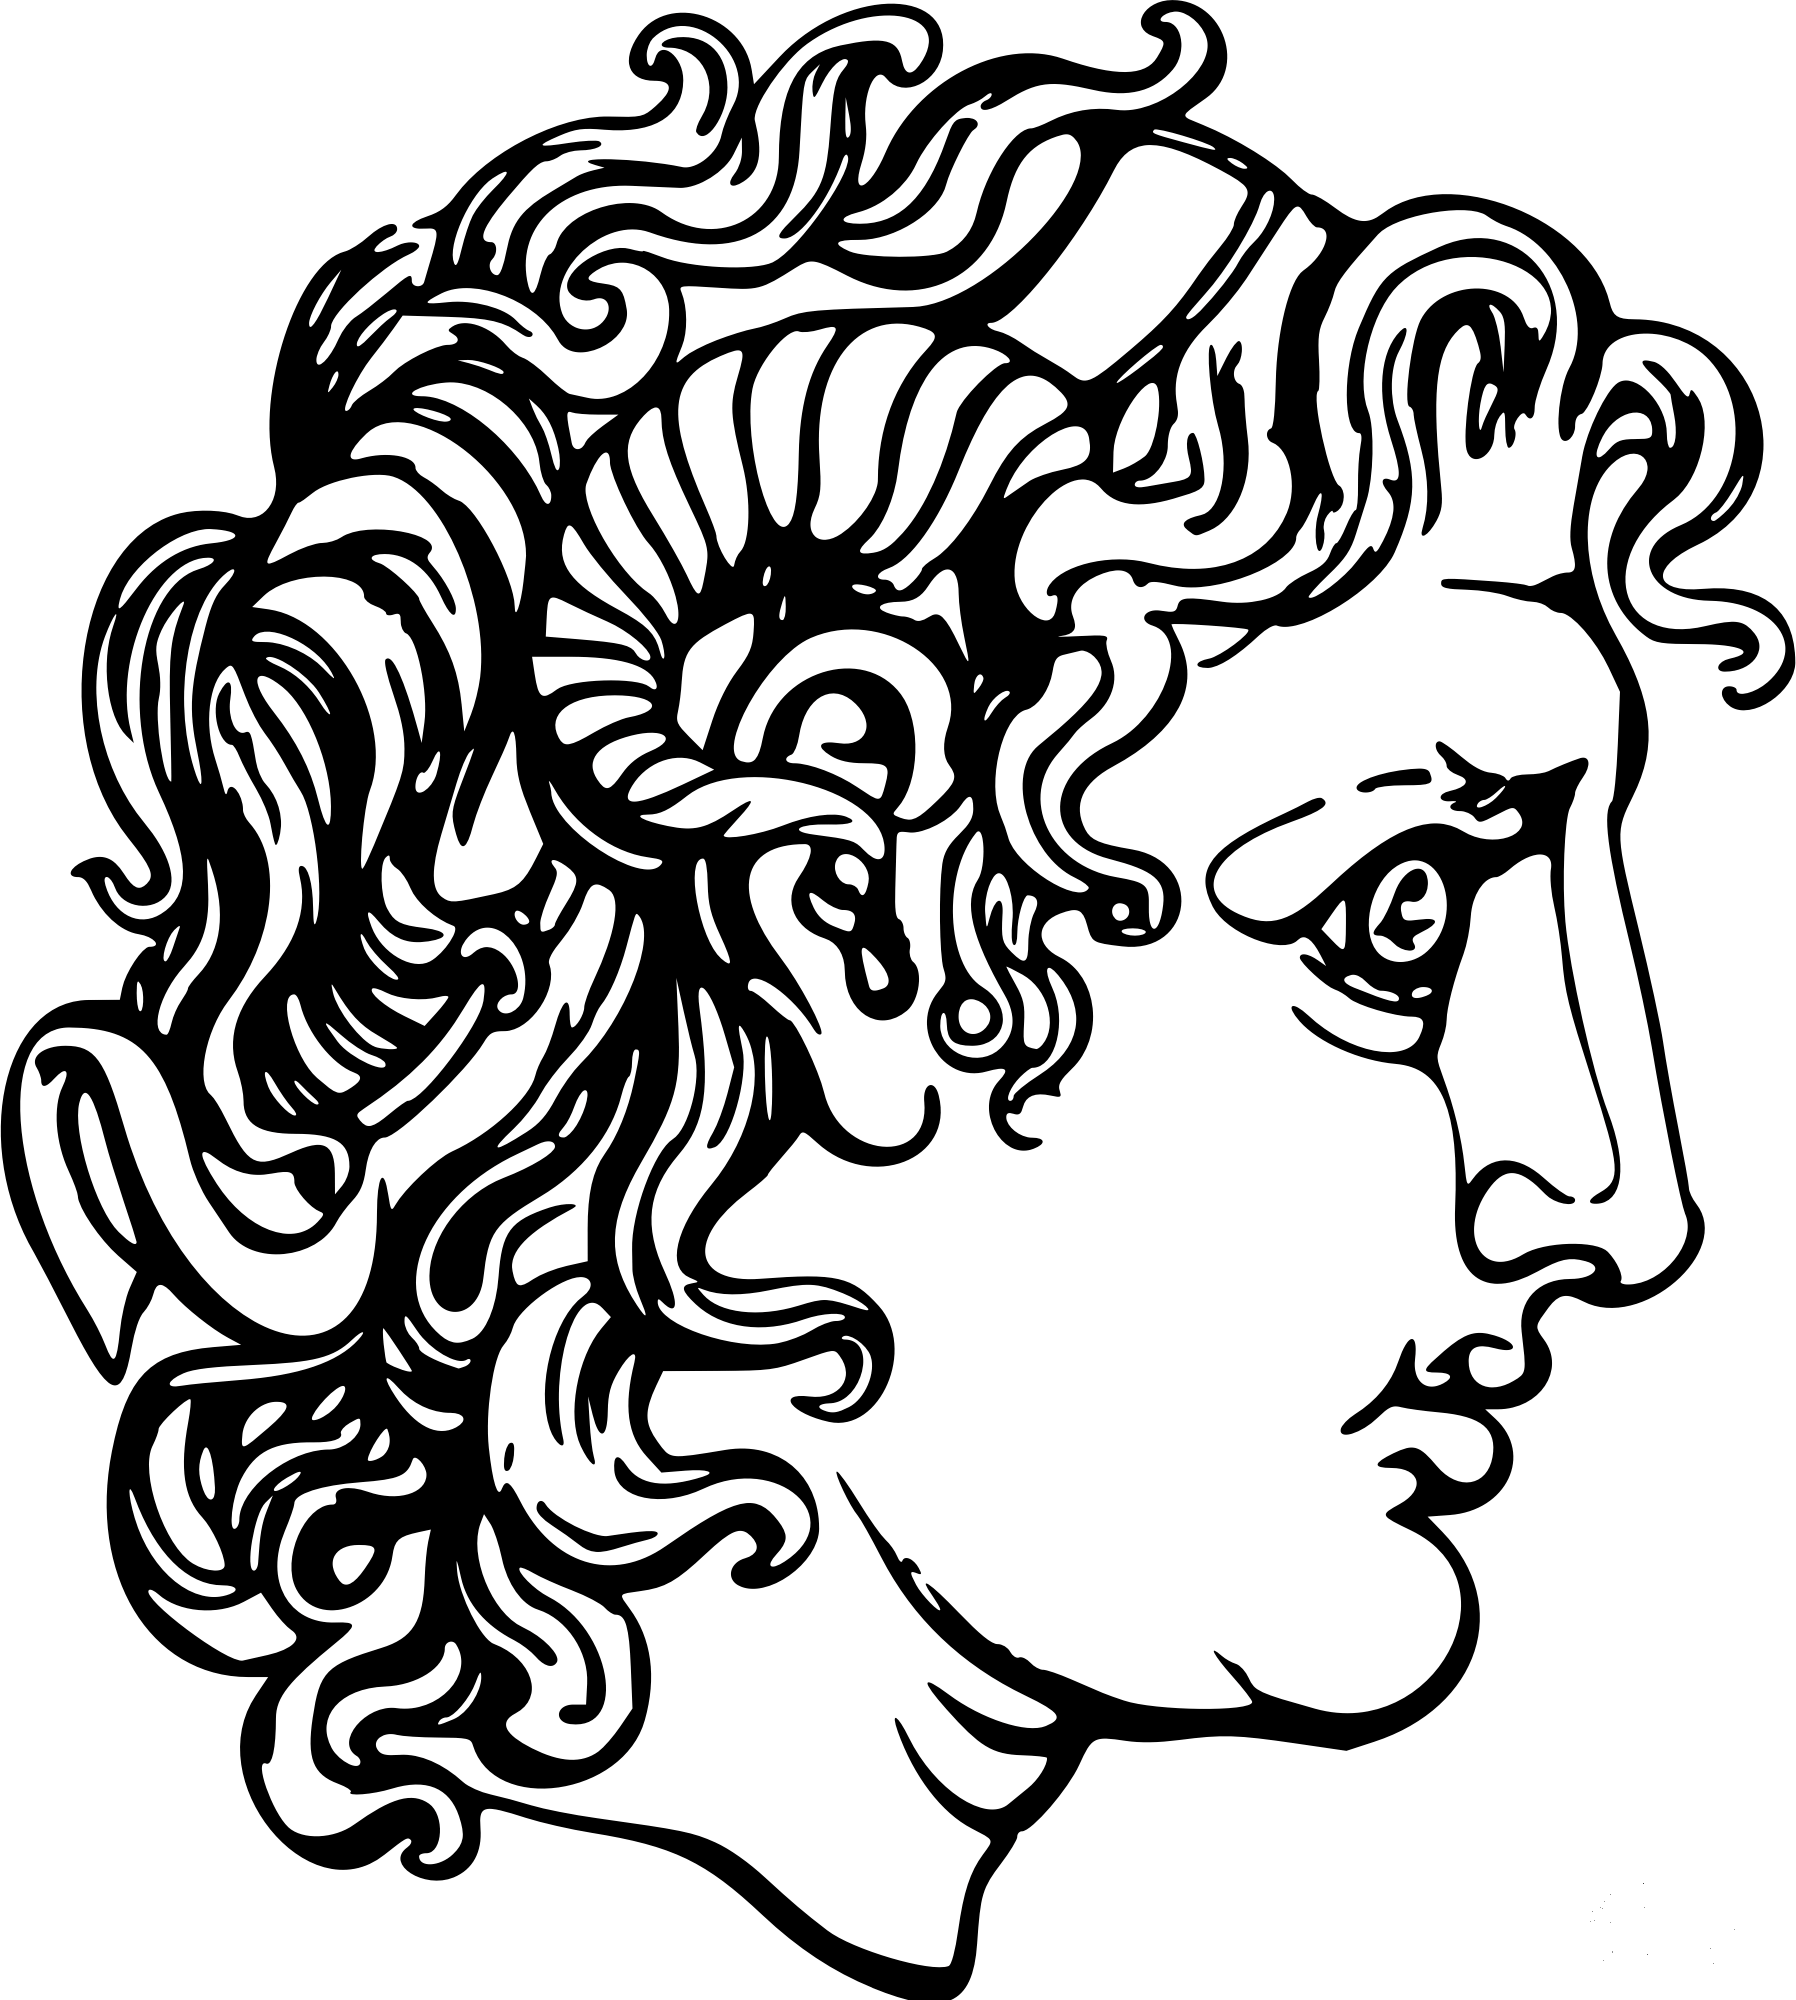 Alexander the Great coloring page - ColouringPages